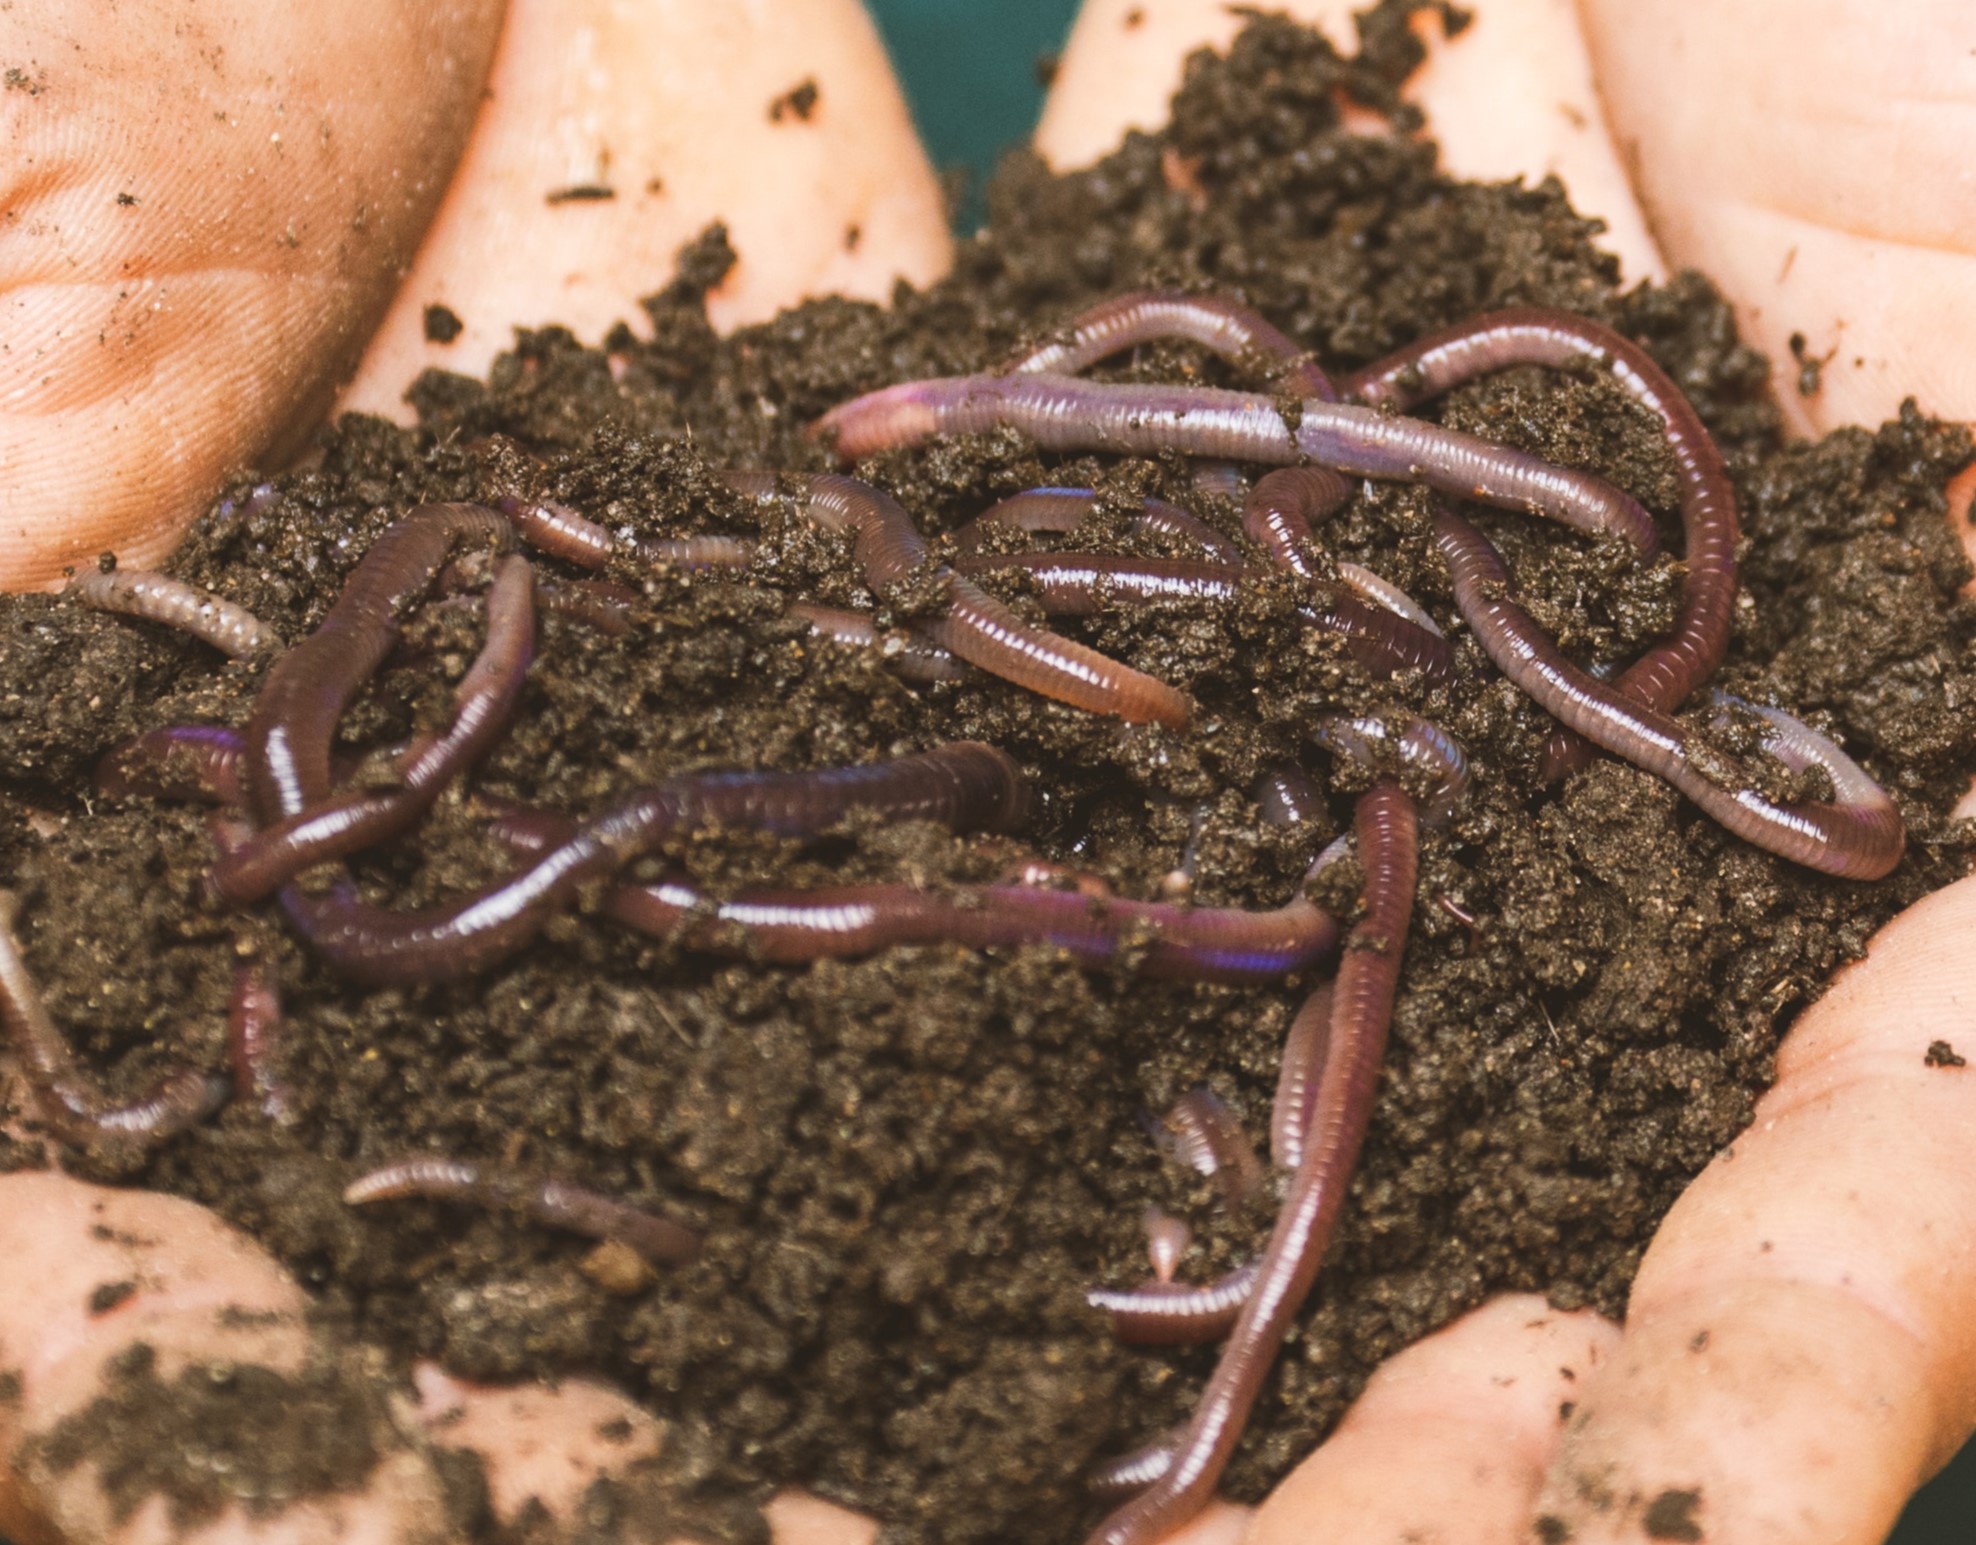 Photo of worms.